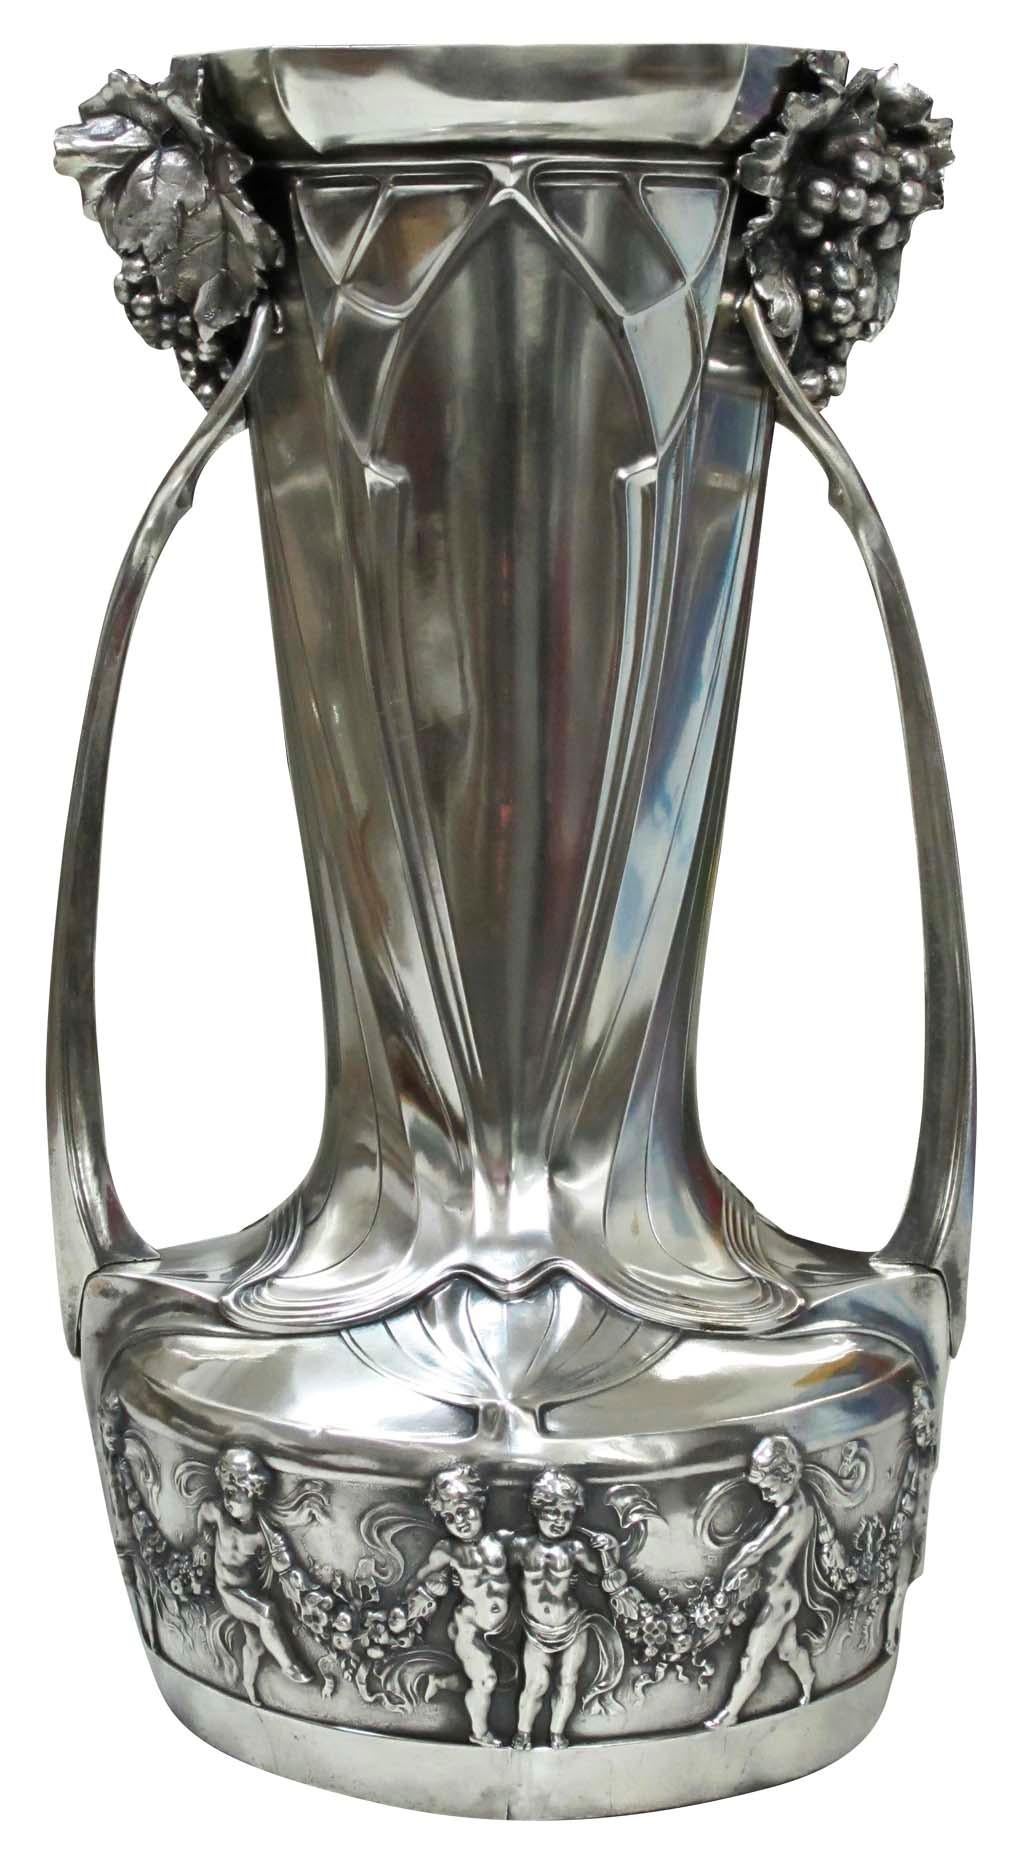 2 Wine Cooler WMF

Style: Art Nouveau
year: 1900
Country: Germany
Materials: silver plated

Several of the WMF objects can be seen in museums
We have specialized in the sale of Art Deco and Art Nouveau and Vintage styles since 1982.If you have any